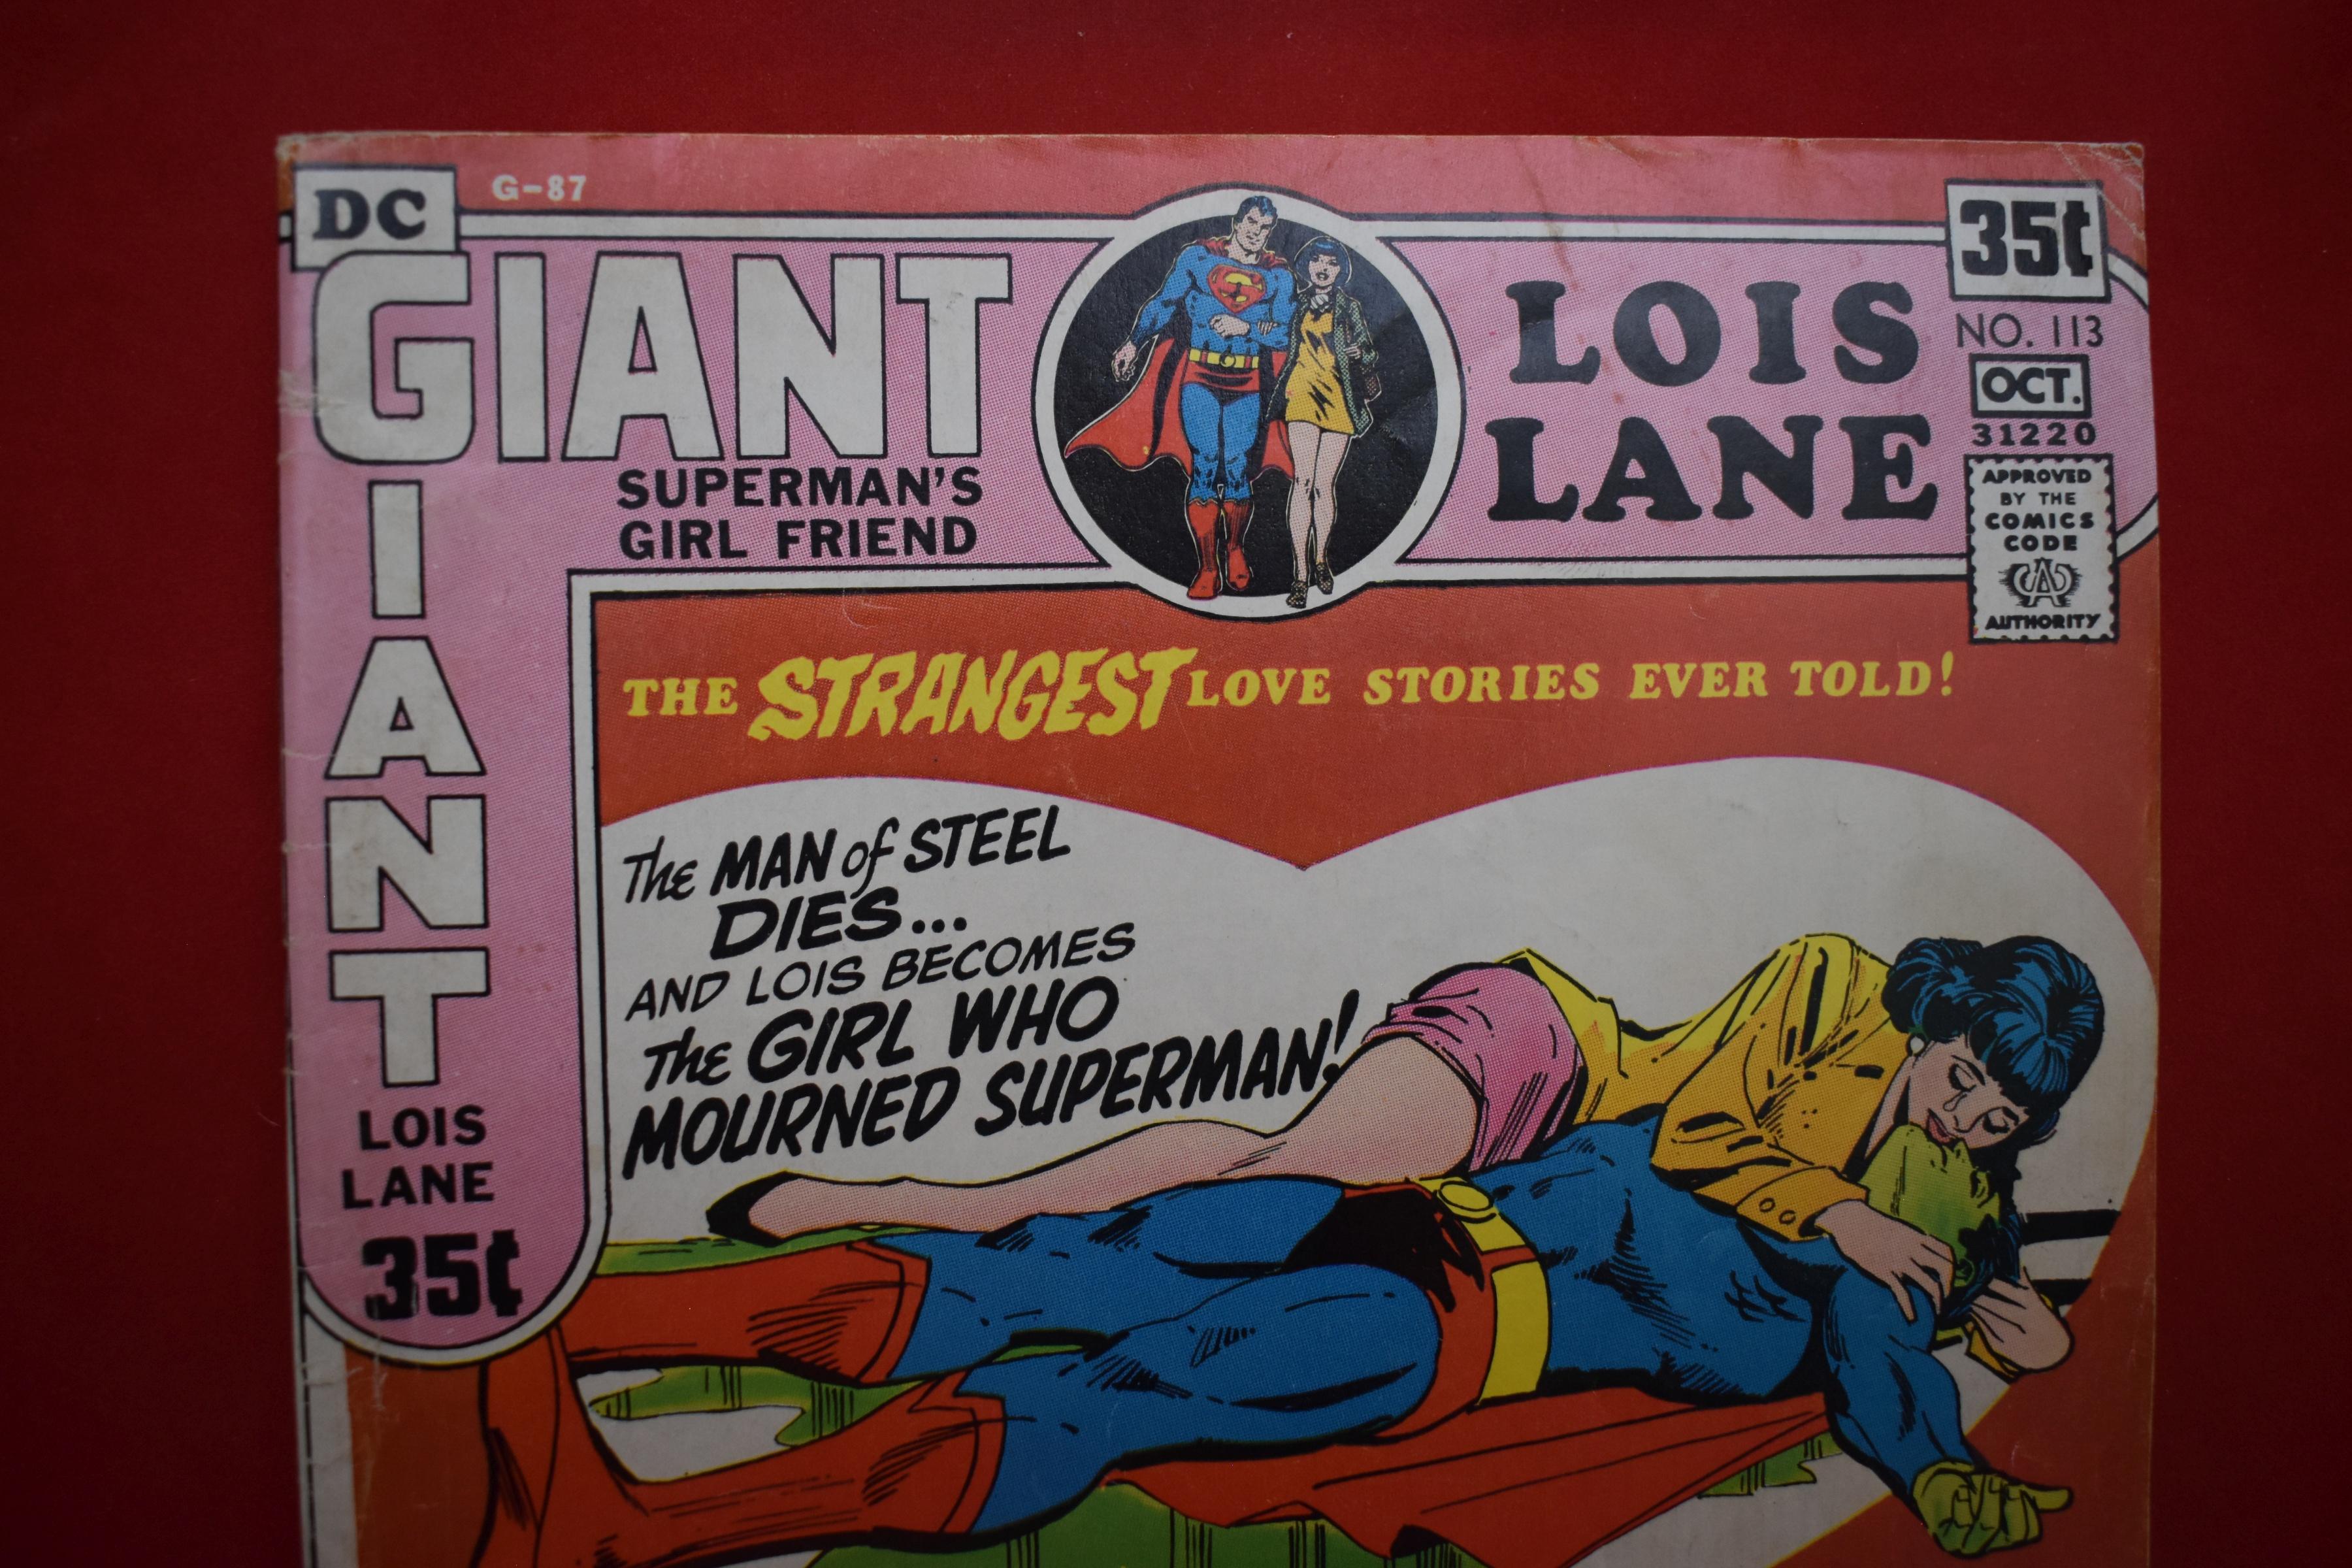 LOIS LANE #113 | THE UNKNOWN SUPERMAN - SCHAFFENBERGER  | *SOLID - BIT OF CREASING - SEE PICS*